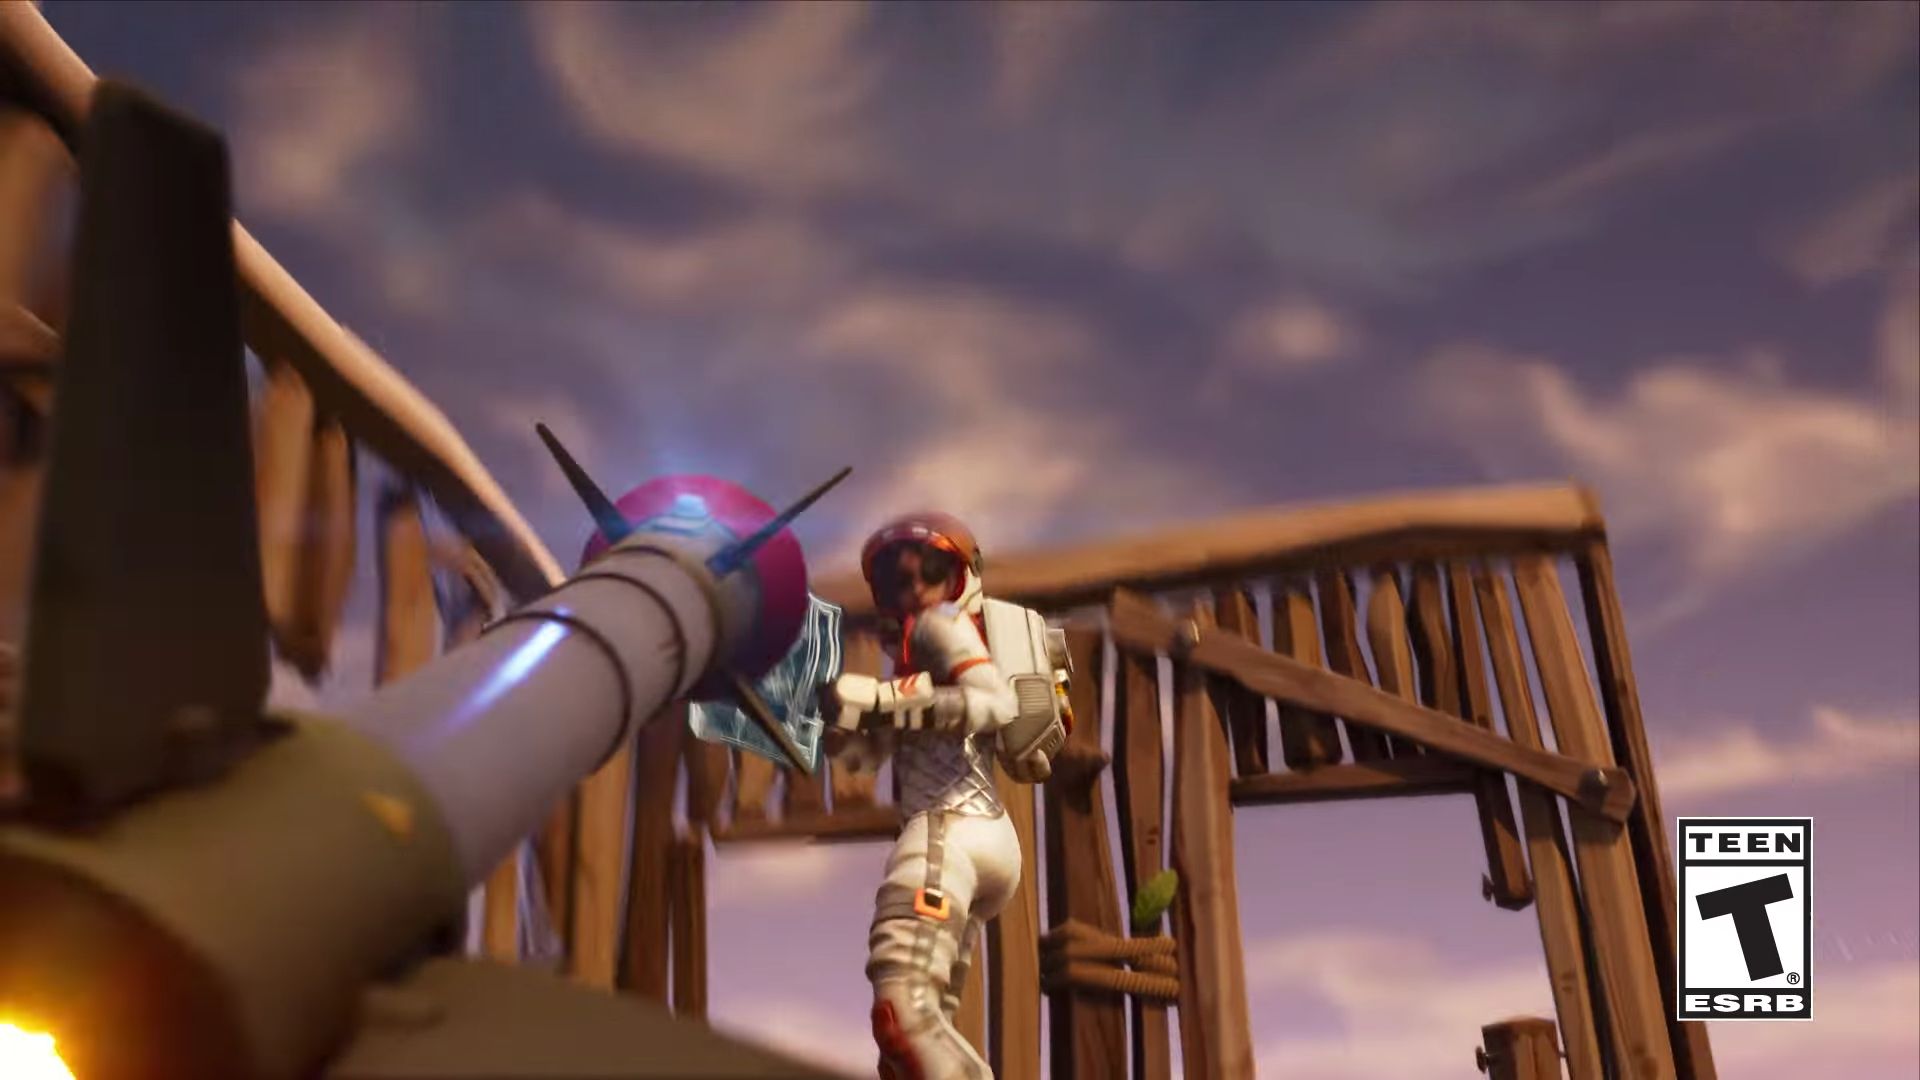 Fortnite v3.4 Brings Guided Missiles and Wraps Up Spring ... - 1920 x 1080 png 2252kB